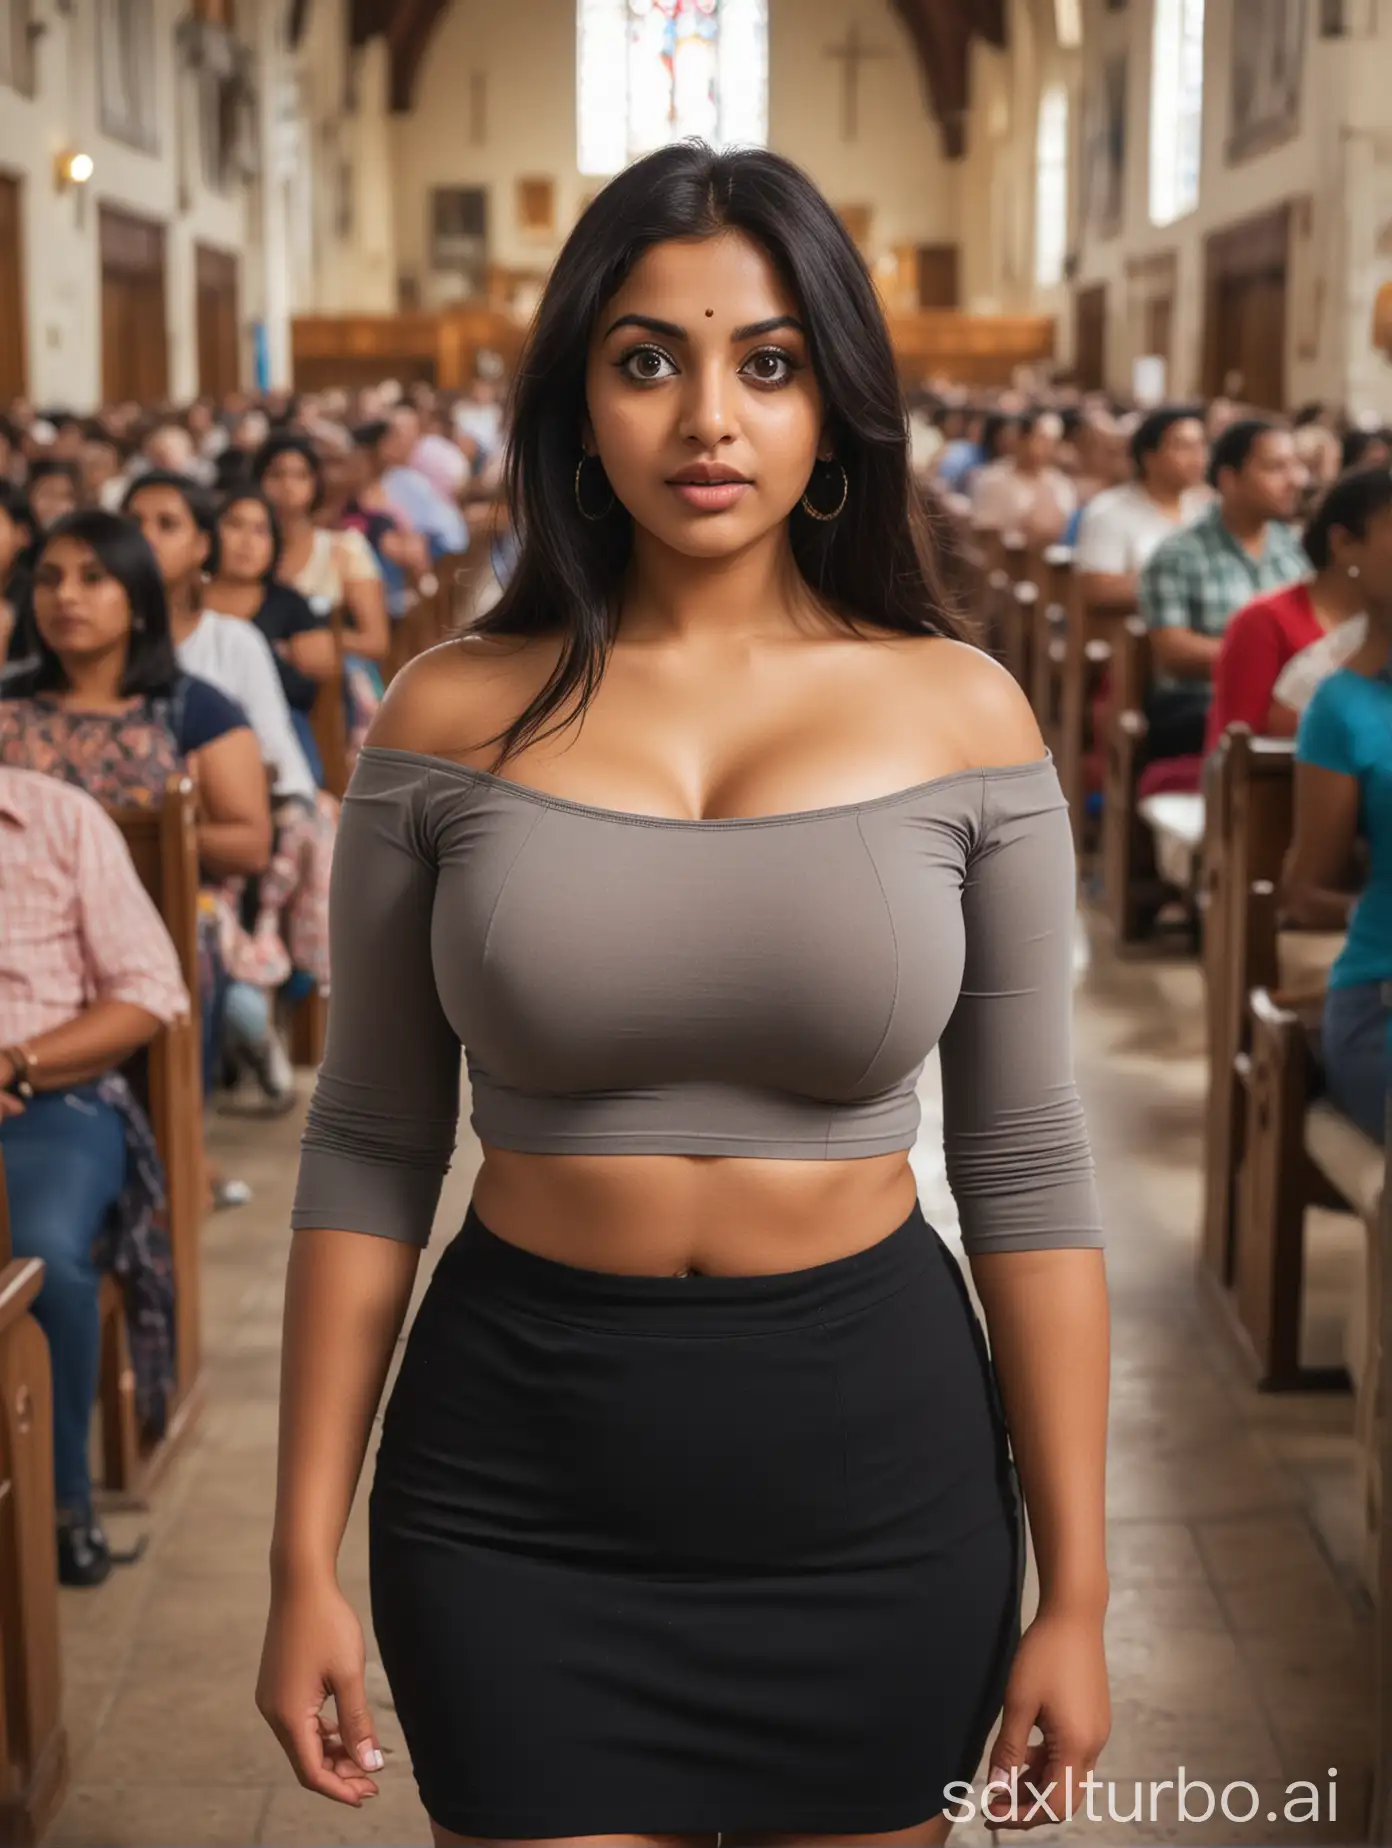 Busty-Indian-Woman-in-Tight-Crop-Top-and-Mini-Skirt-Captivates-Crowd-in-Church-Hall